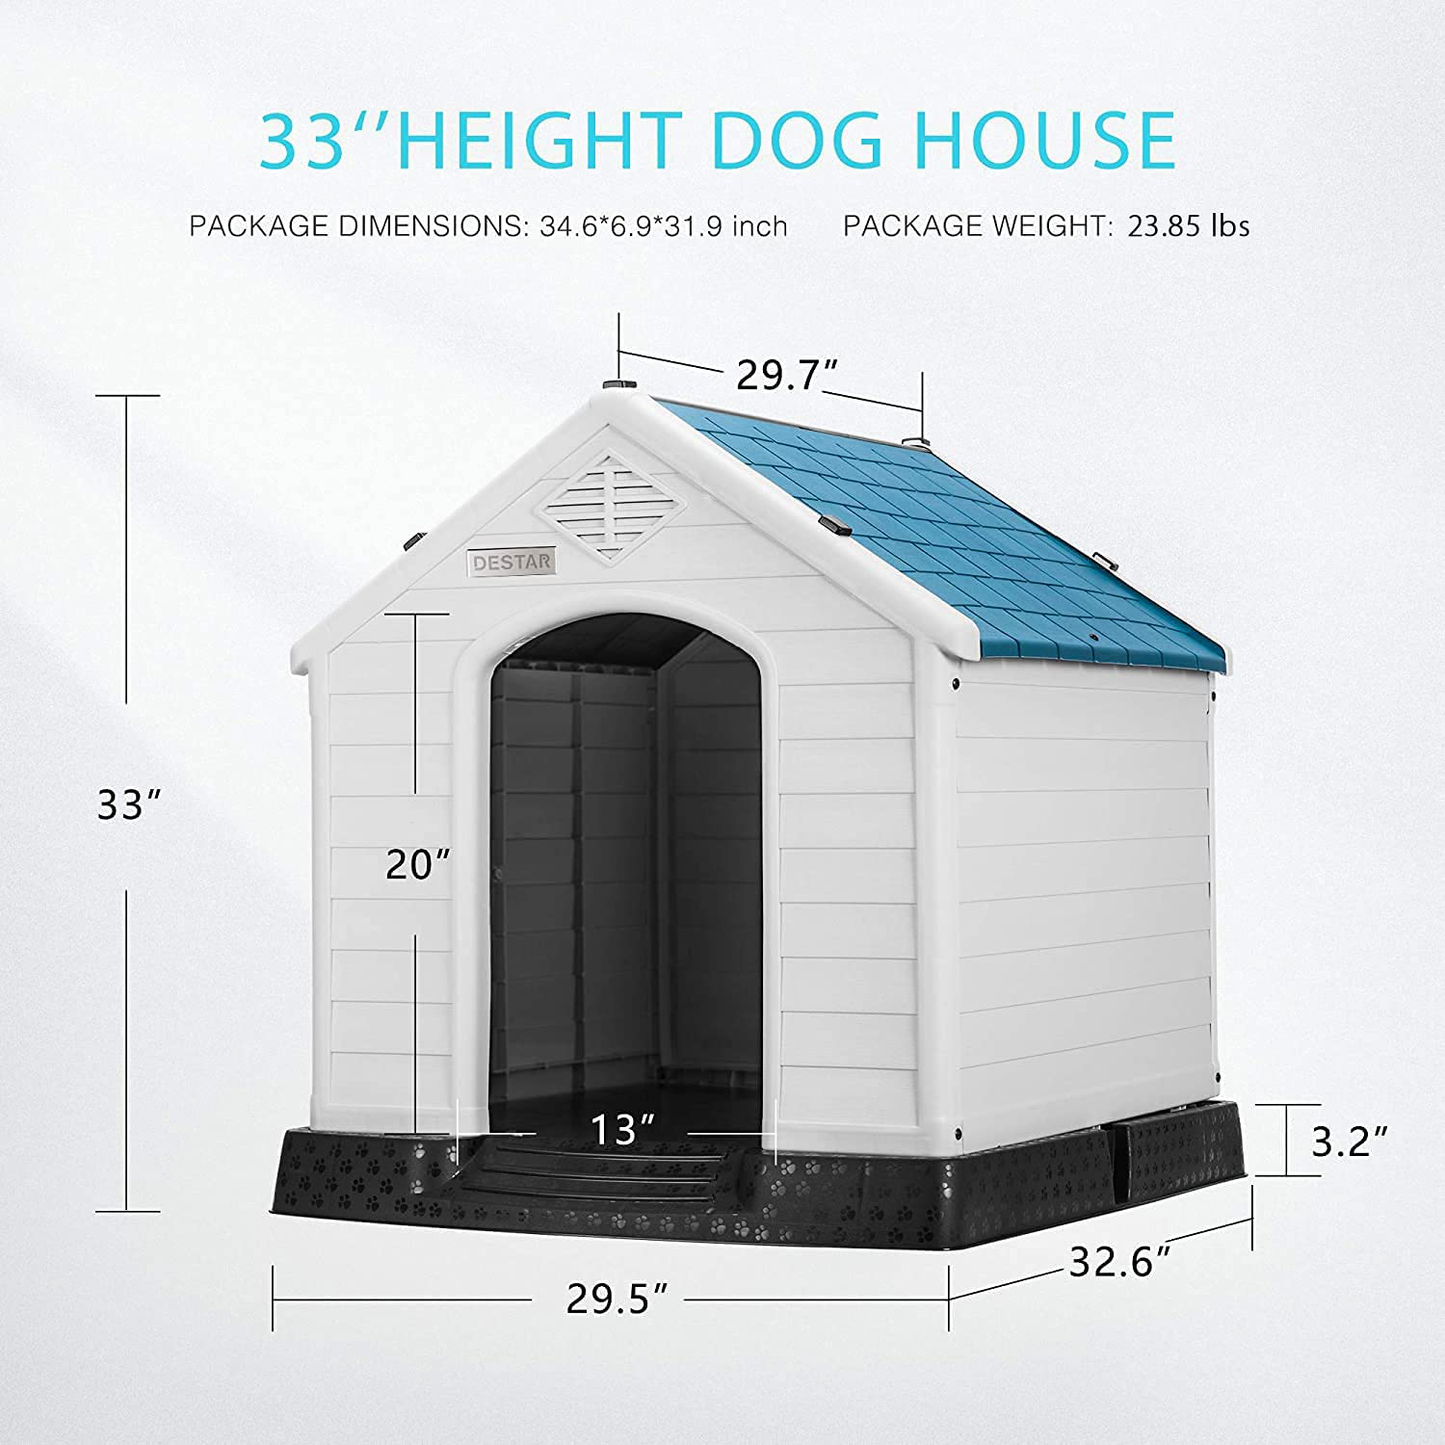 Destar Durable Waterproof Plastic Pet Dog House Indoor Outdoor Puppy Shelter Kennel with Air Vents and Elevated Floor Animals & Pet Supplies > Pet Supplies > Dog Supplies > Dog Houses DEStar   